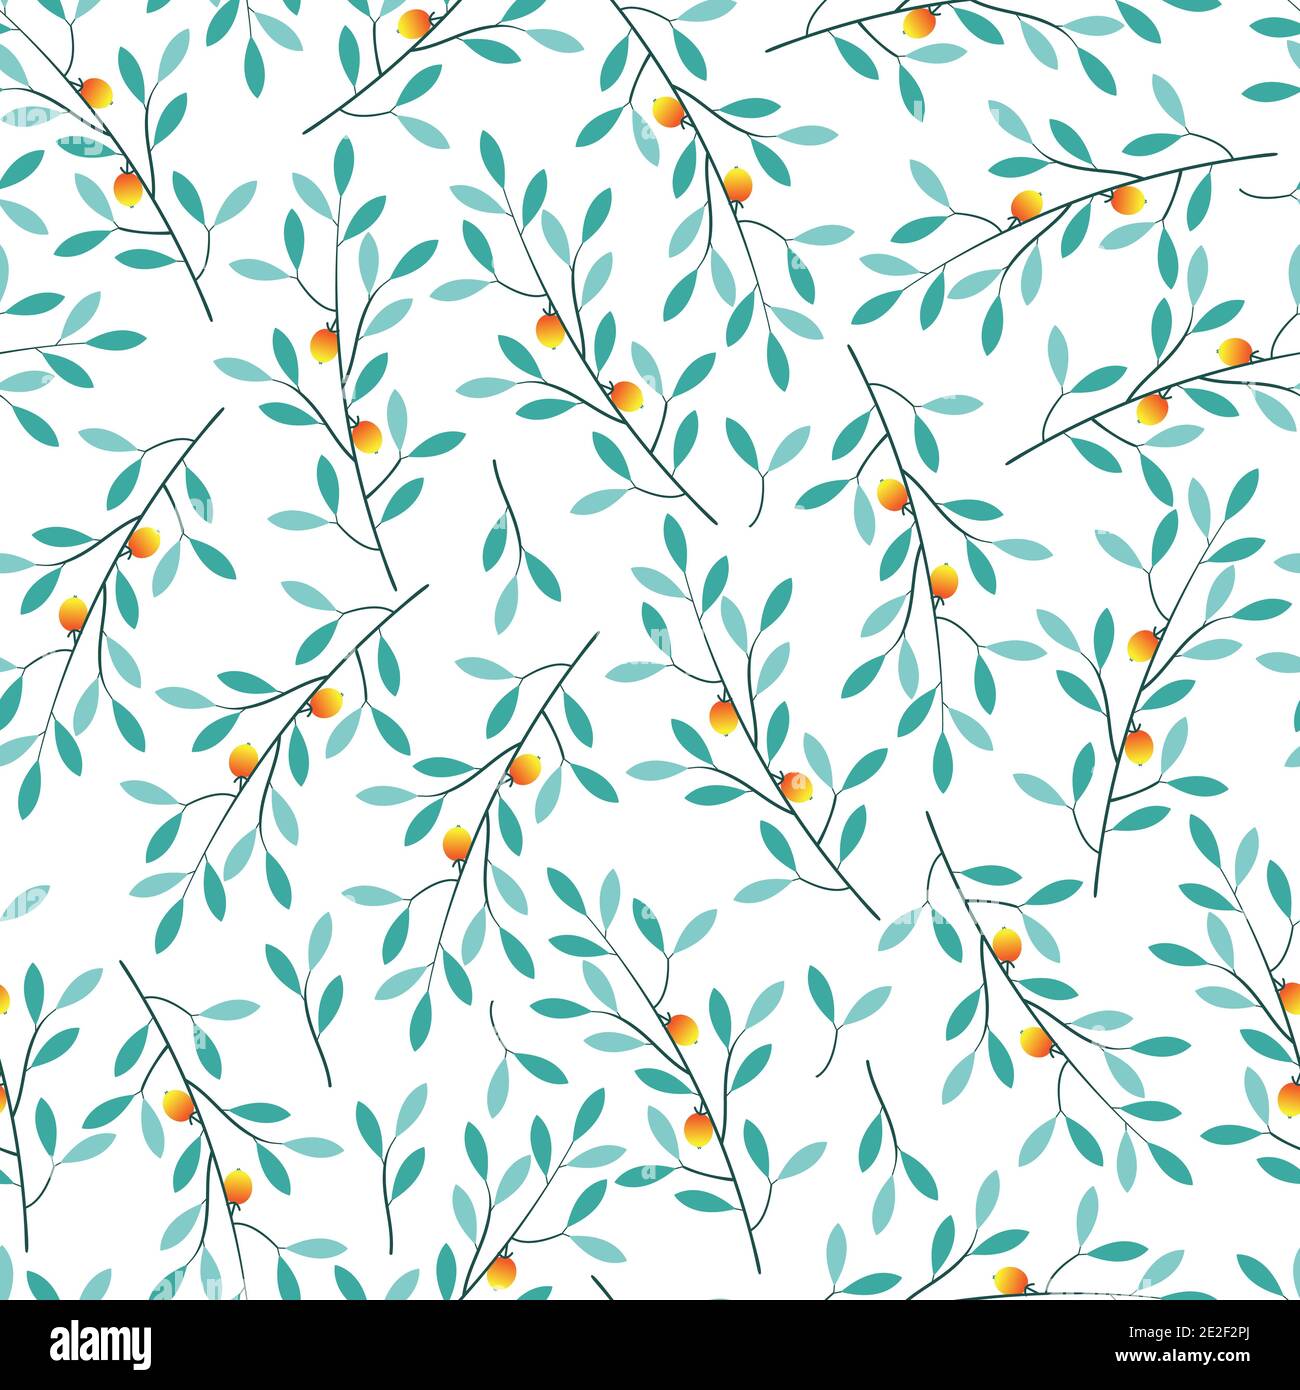 Stylish seamless vector floral ditsy pattern design of vibrant leaves and trees. Modern foliage repeating texture background for printing and textile Stock Vector